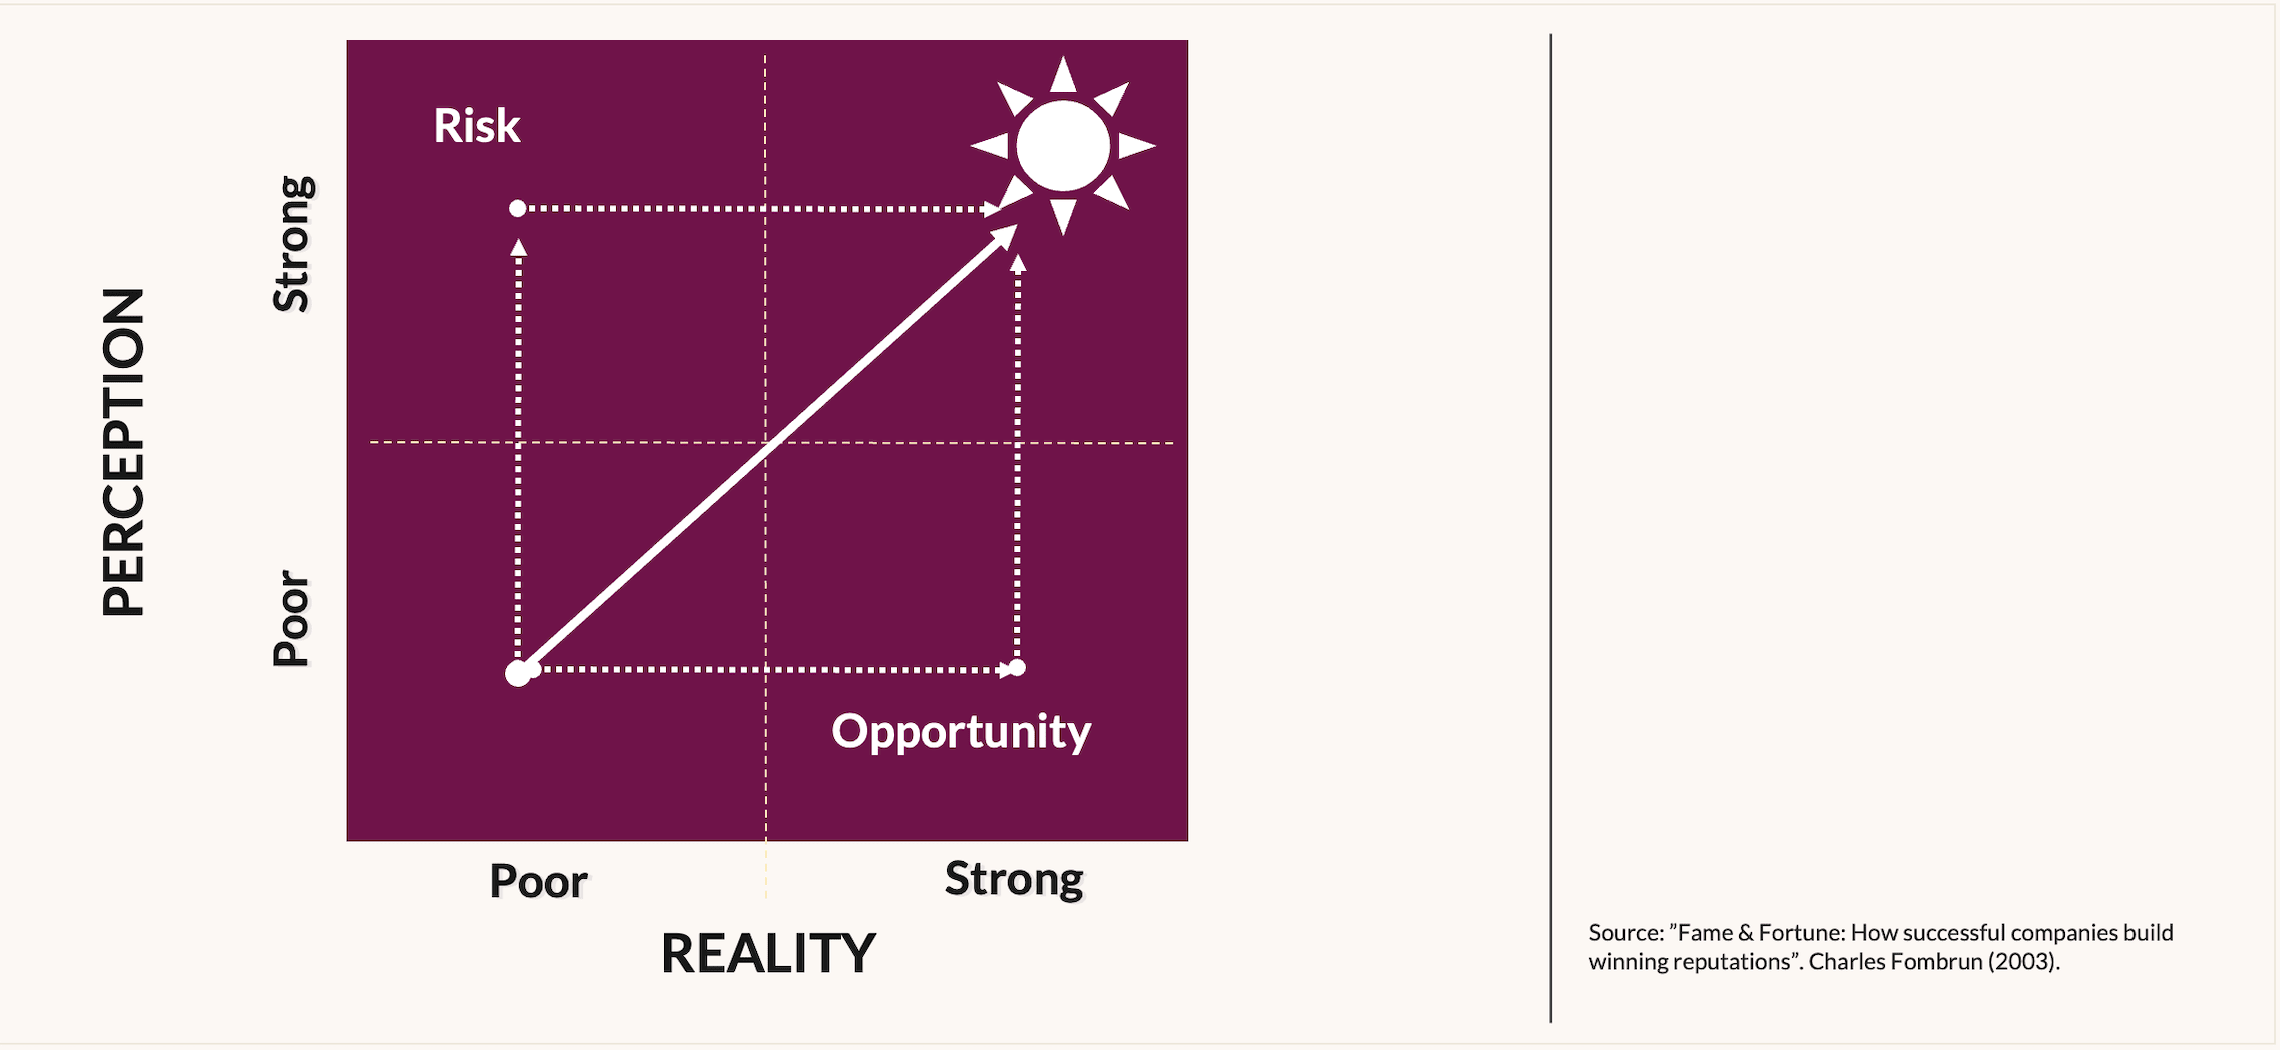 A chart, with 'Reality' on the x-axis, and 'Perception' on the y-axis, showing that strong reality but poor perception creates opportunity for growth, and that poor reality against strong perception will create reputational risk. source: “Fame & Fortune: How successful companies build winning reputations” 2003, Fombrun